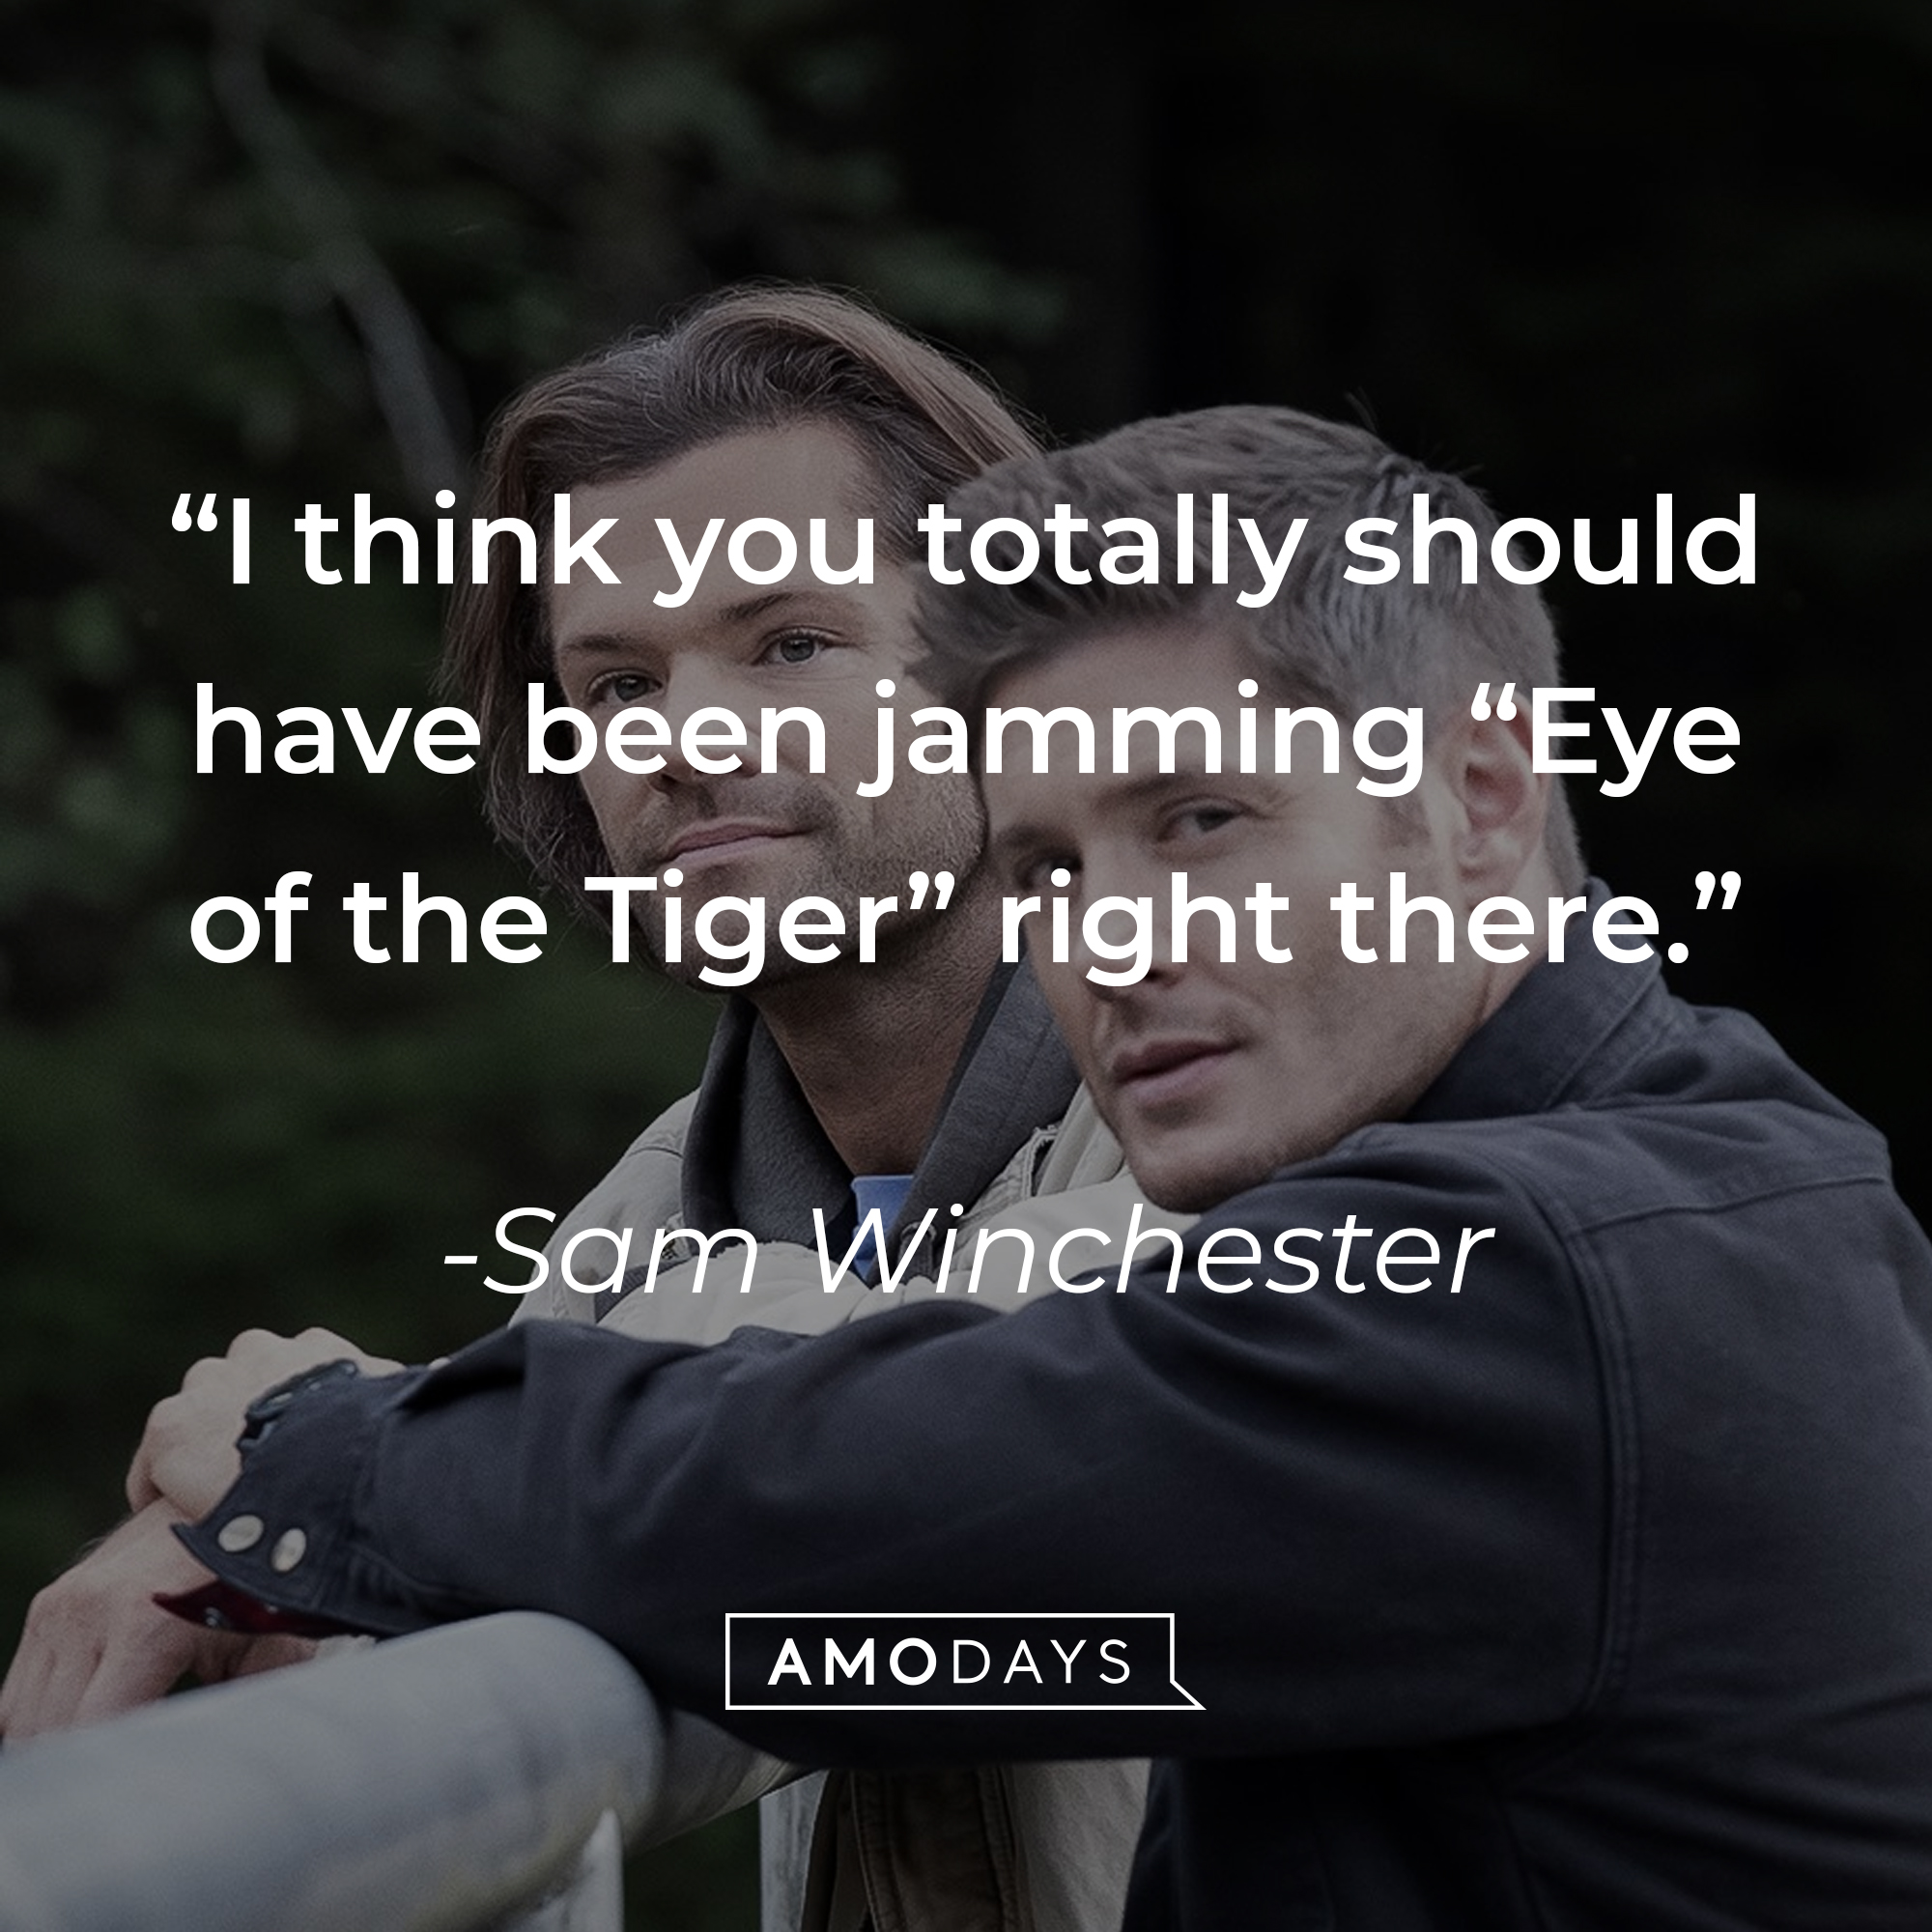 Sam Winchester's quote: "I think you totally should have been jamming "Eye of the Tiger" right there." | Source: Facebook.com/Supernatural